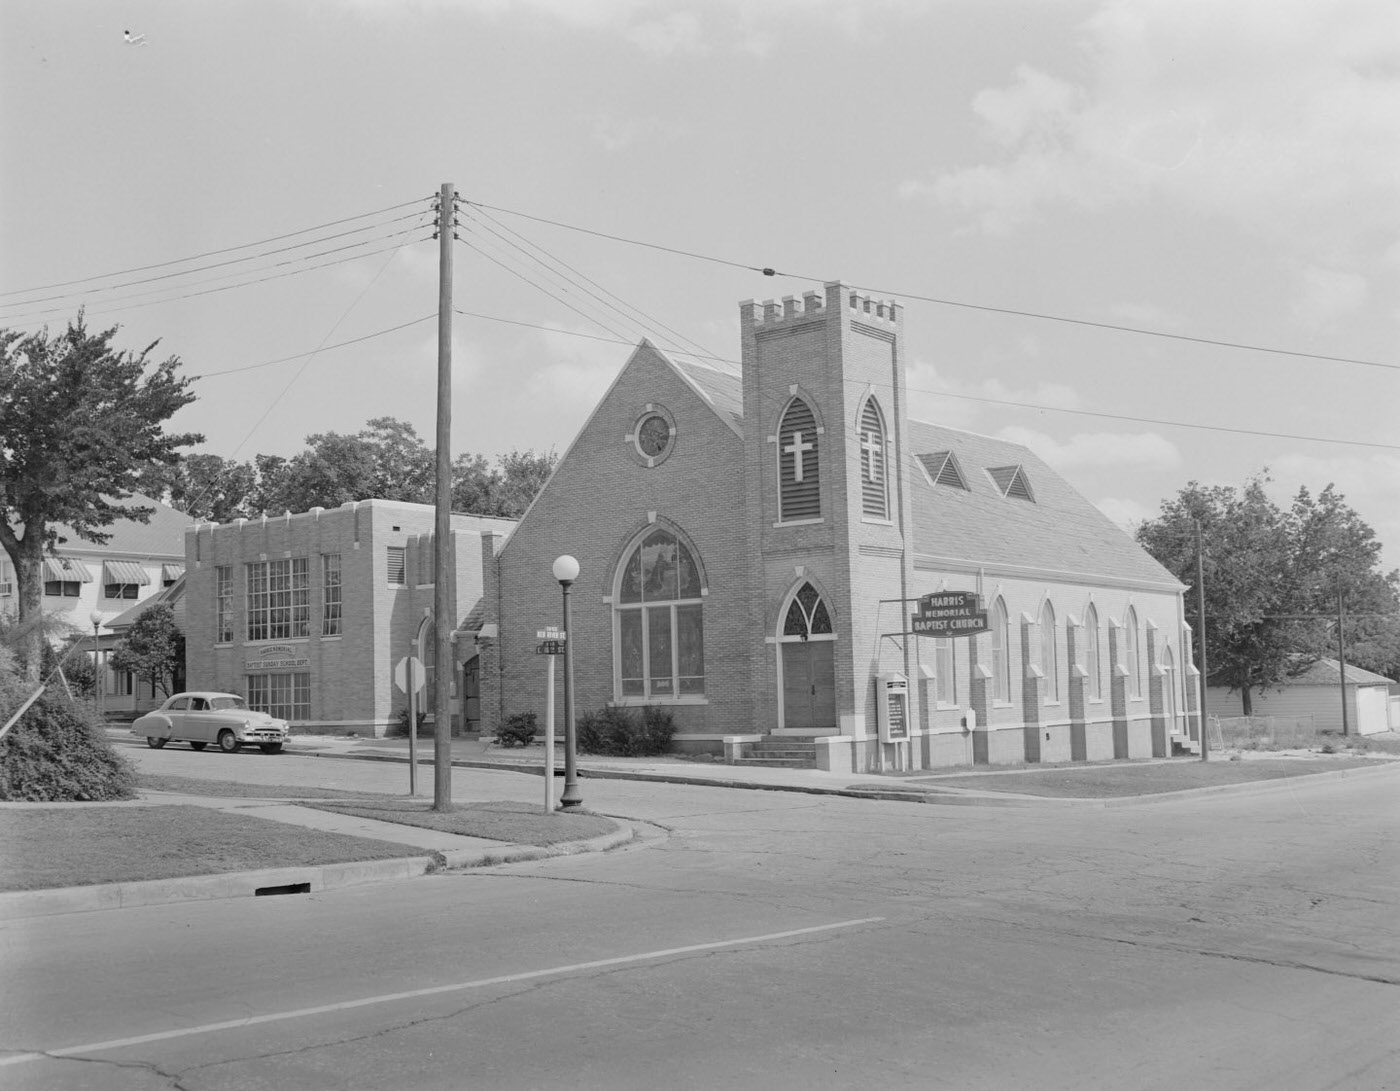 Harris Memorial Baptist Church with Stained Glass, 1954